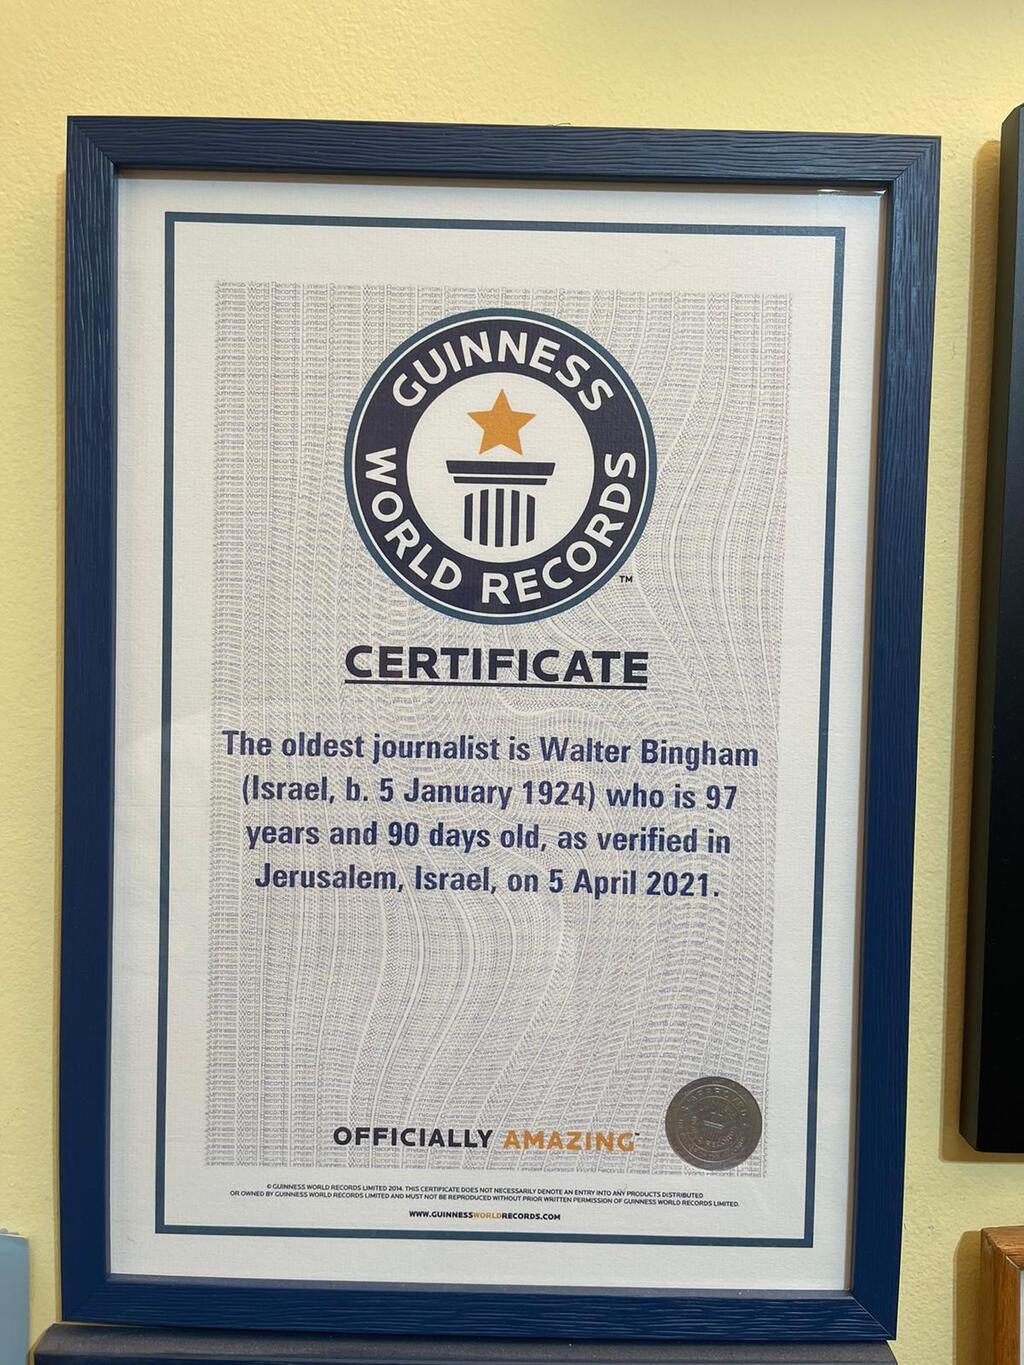 Guinness World Records certificate for the oldest journalist